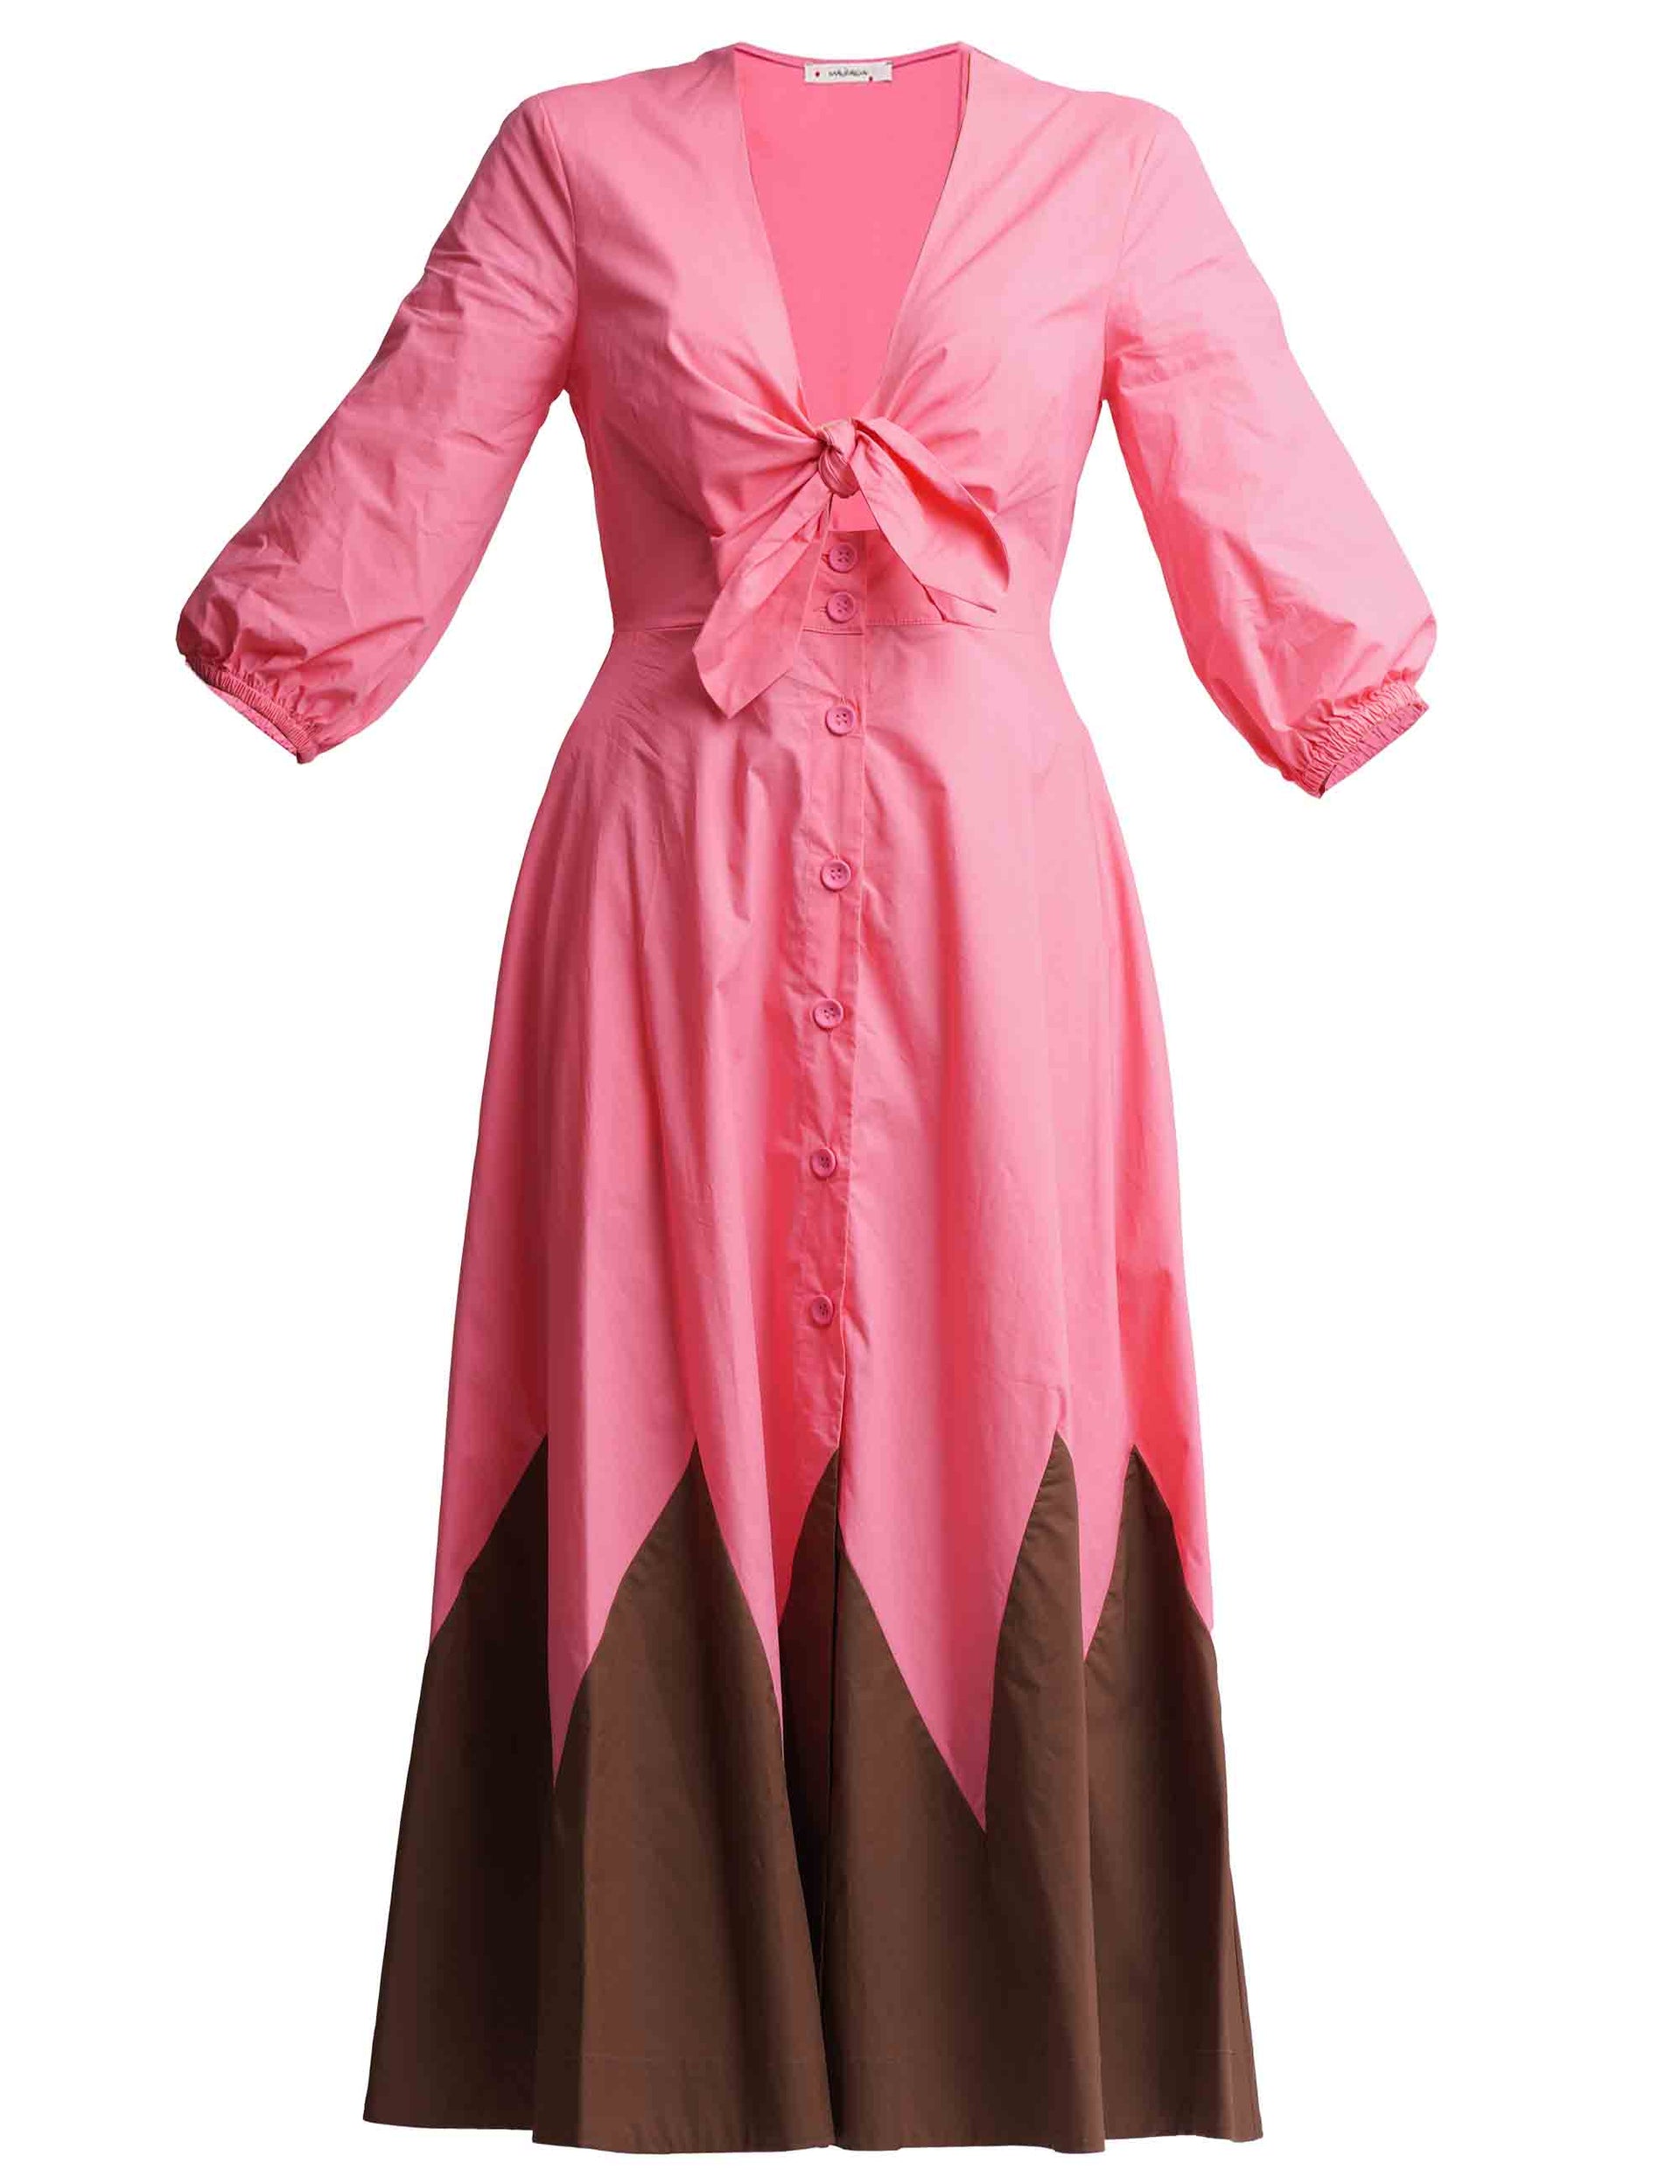 Inlay women's dresses in pink and brown cotton with 3/4 sleeves